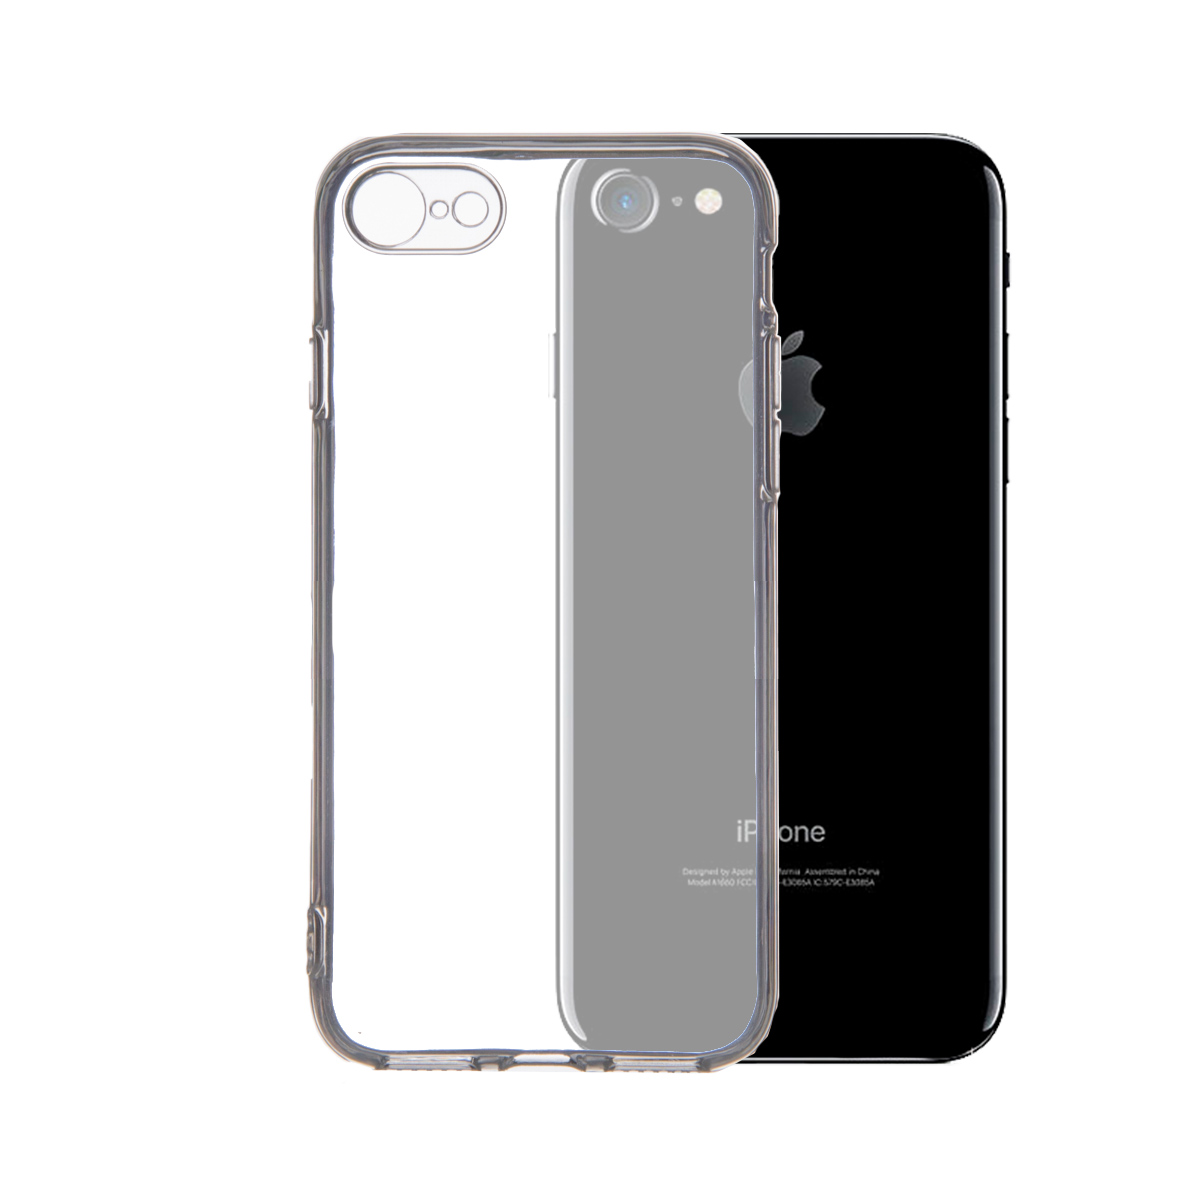 Tpu clear solid for iphone 7/8/se 2020 (4.7")